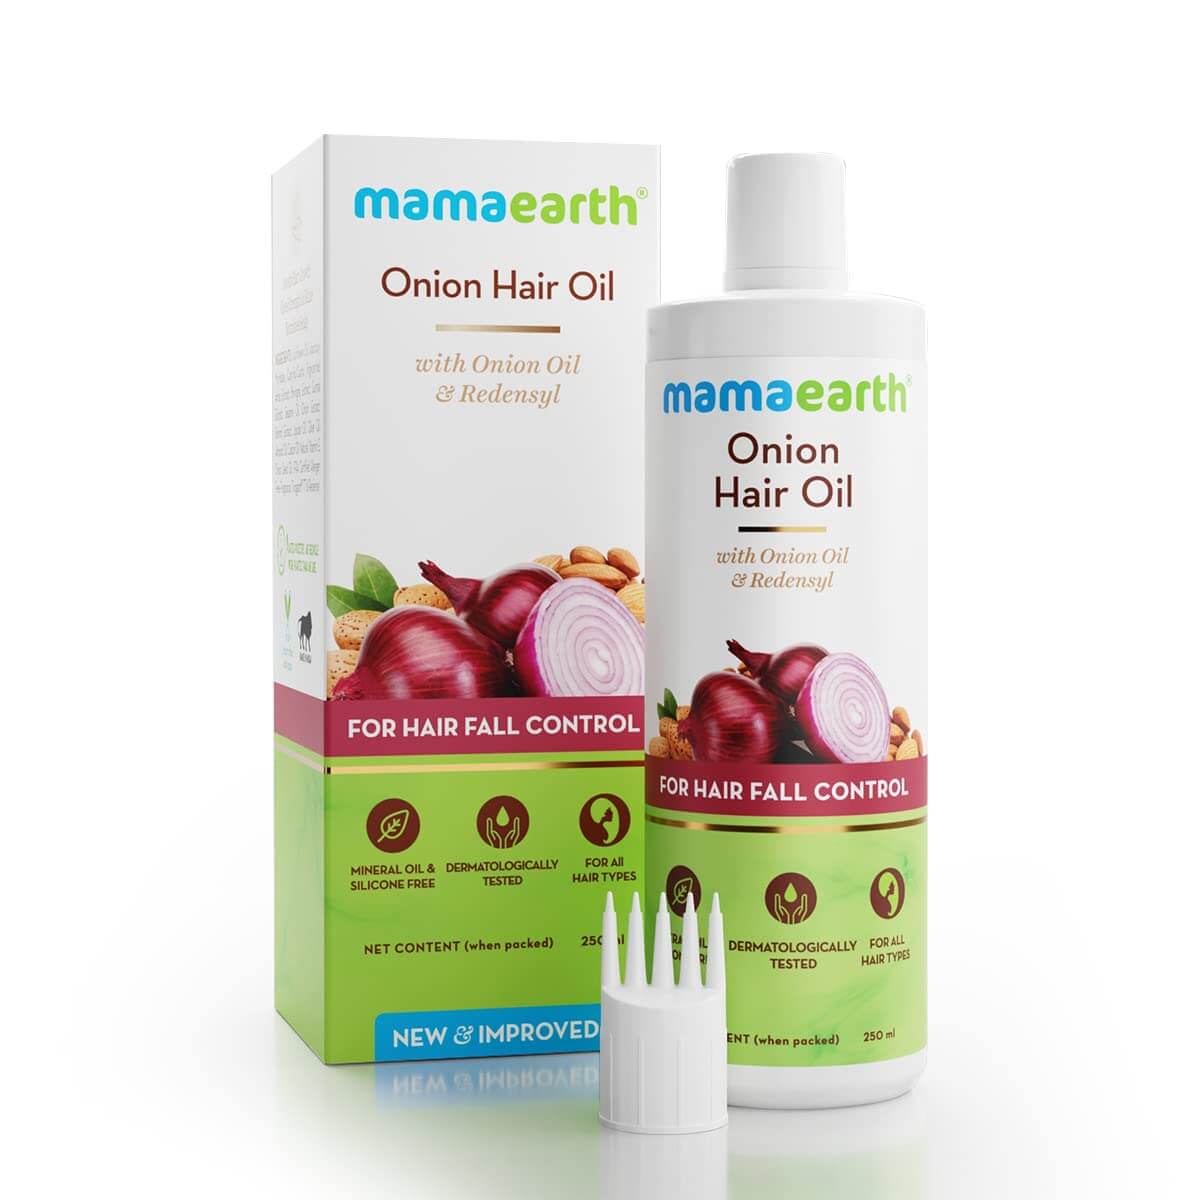 Mamaearth Onion Hair Oil helps to reduce hair fall and provides strength to the hair making them thicker softer and silkier